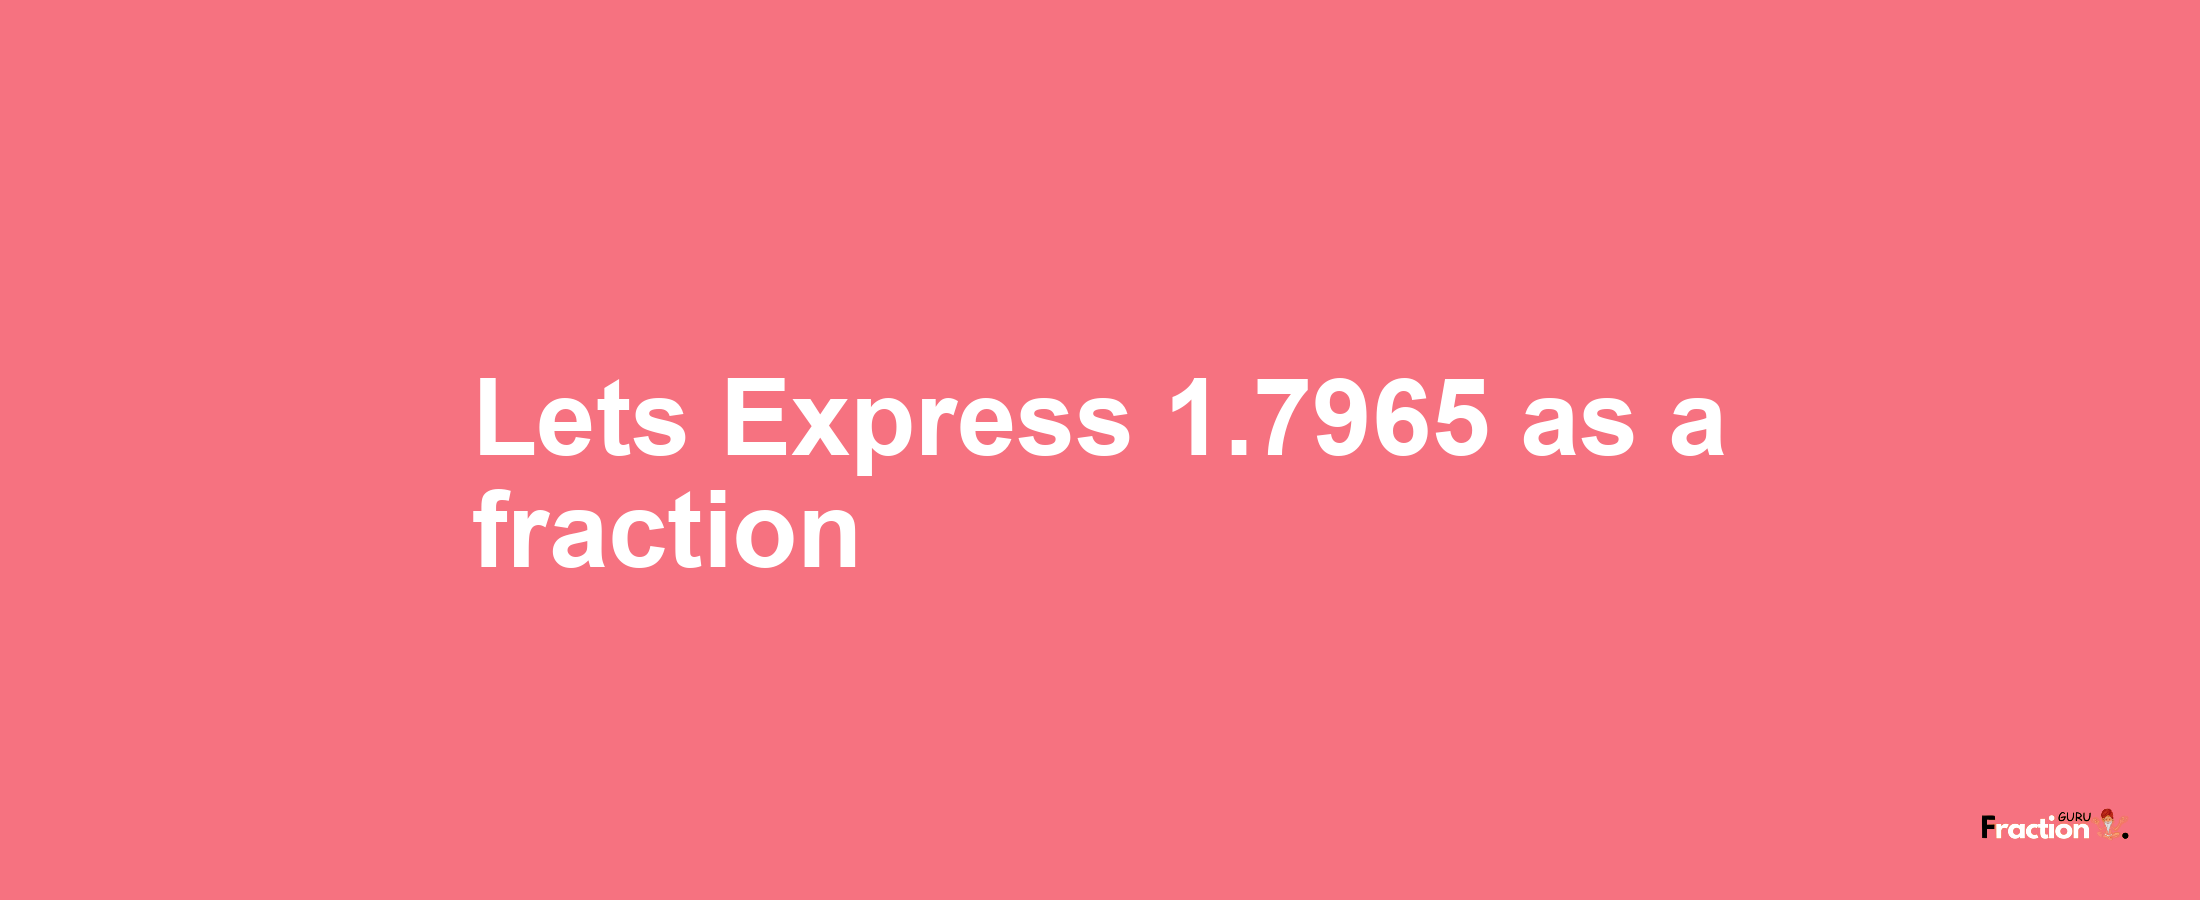 Lets Express 1.7965 as afraction